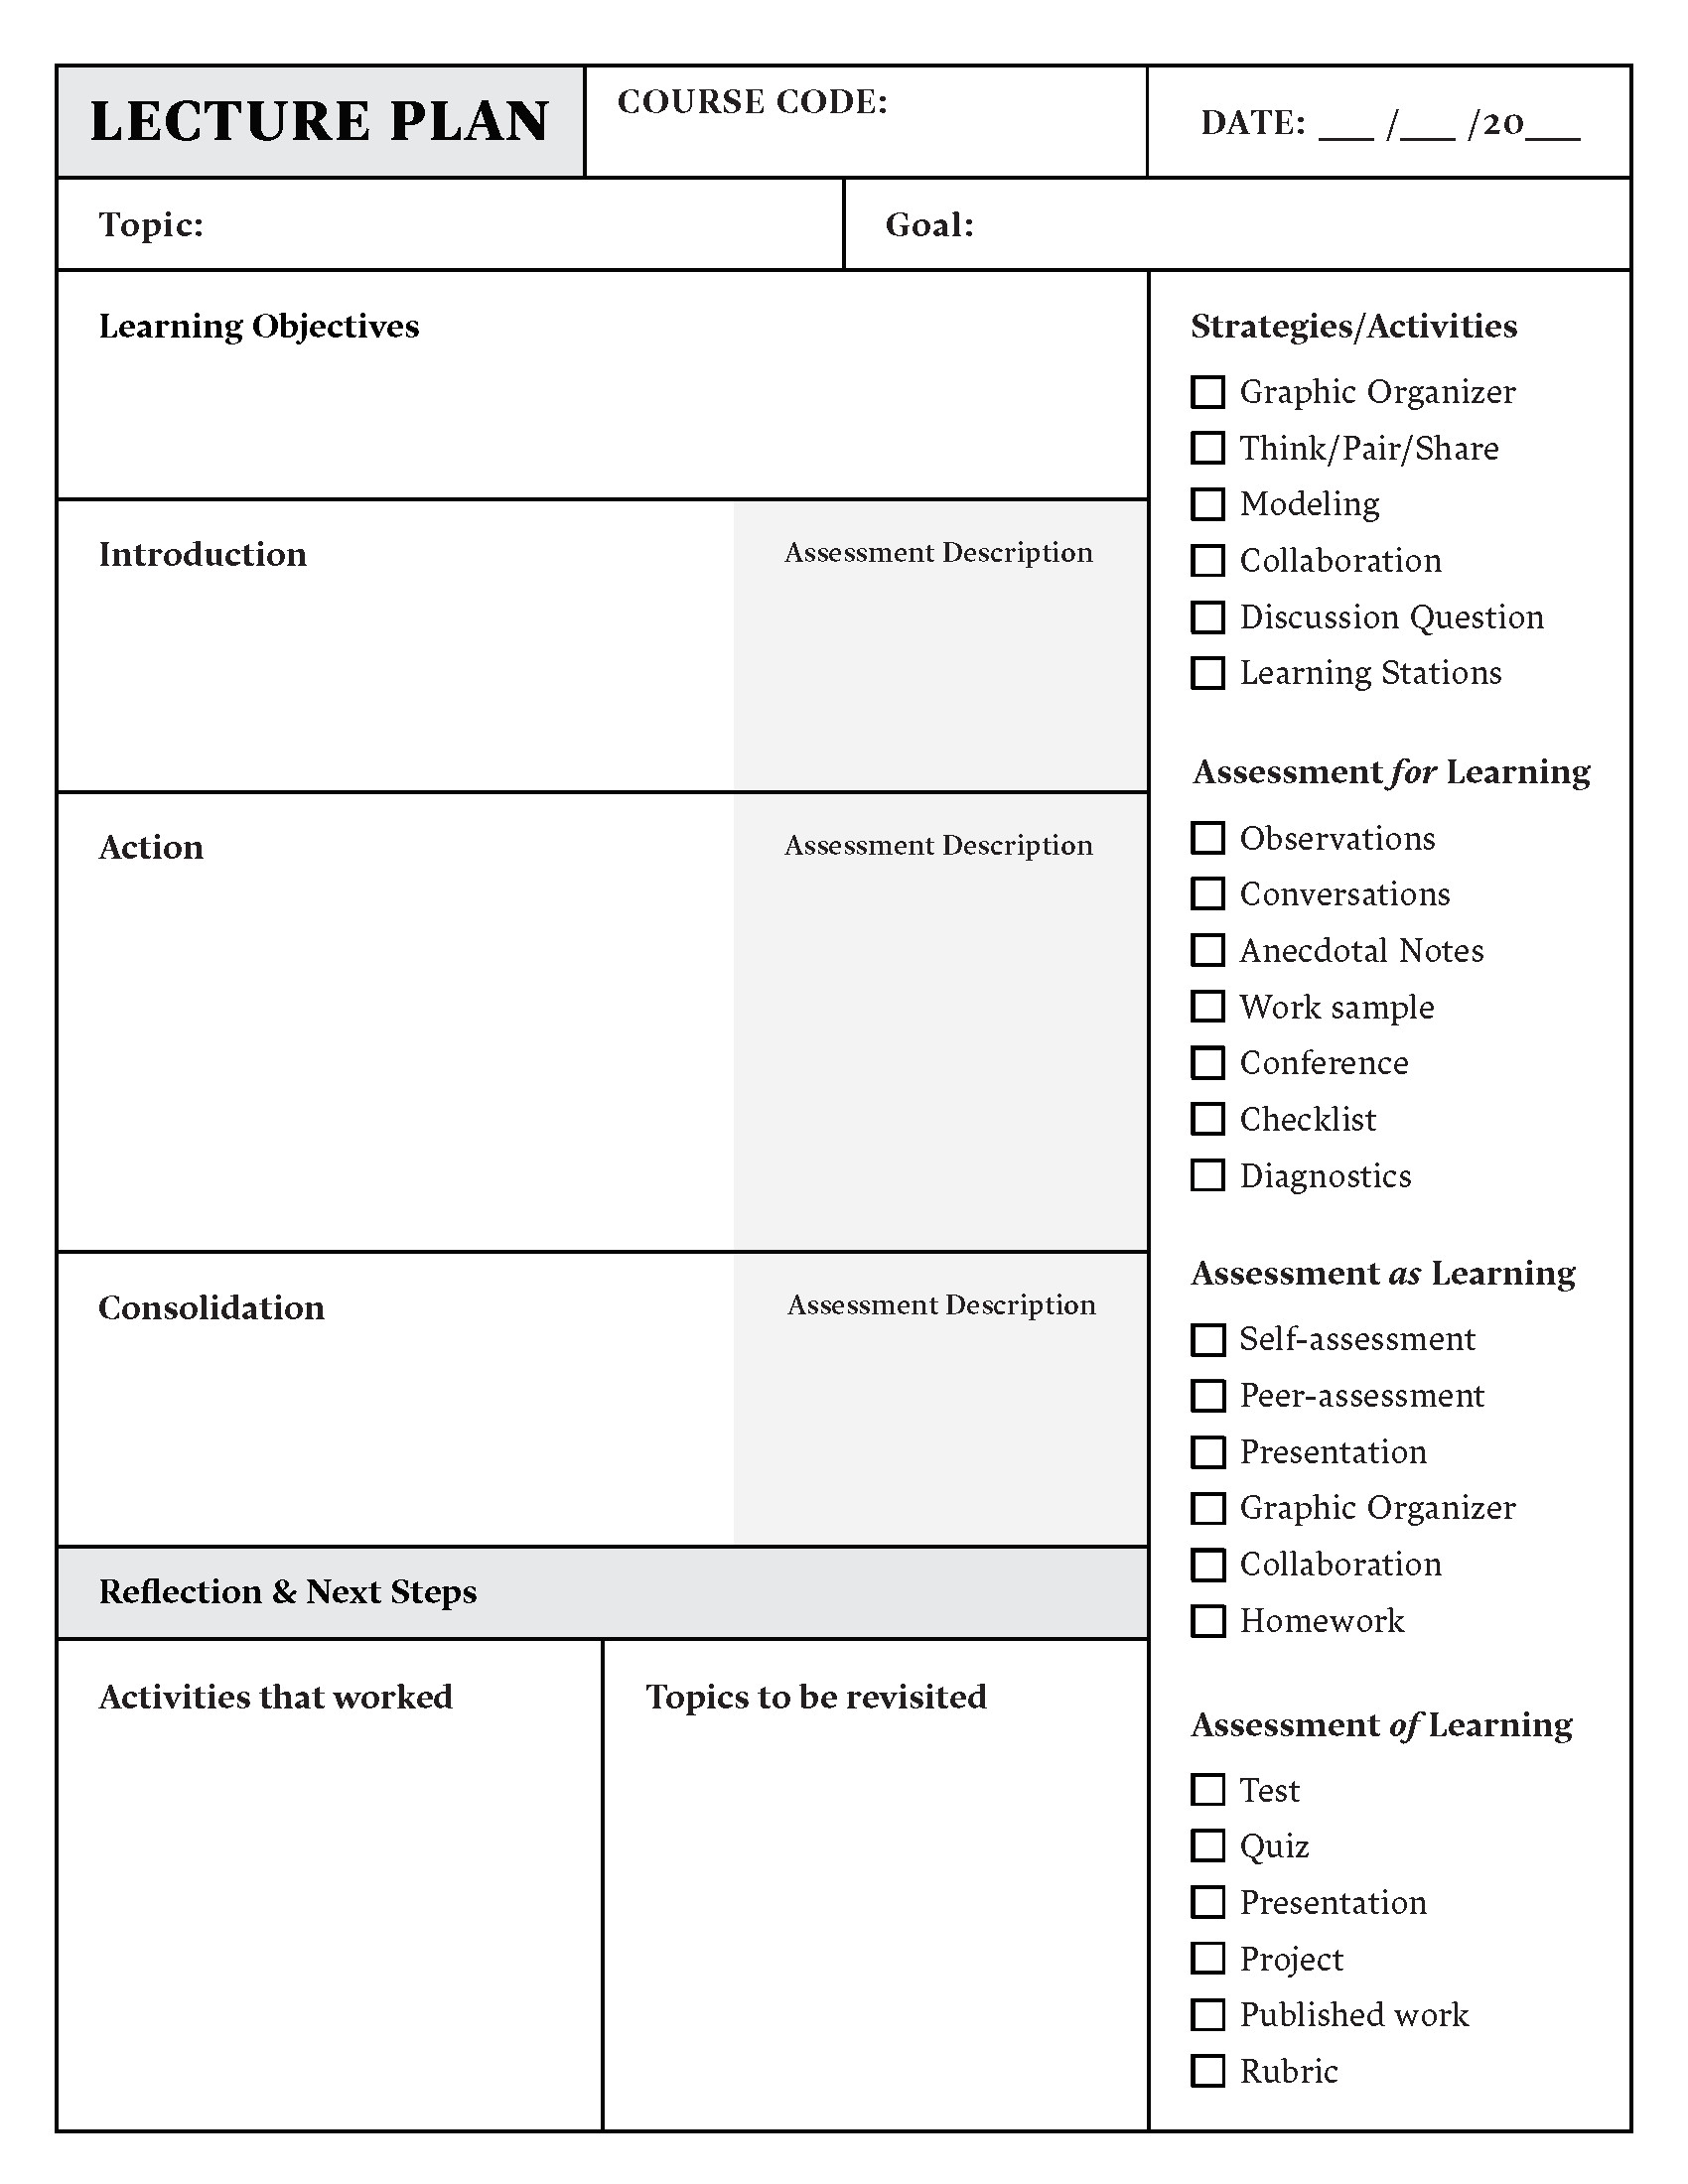 Lesson Plan Images Lesson Plan Template Download In Word or Pdf